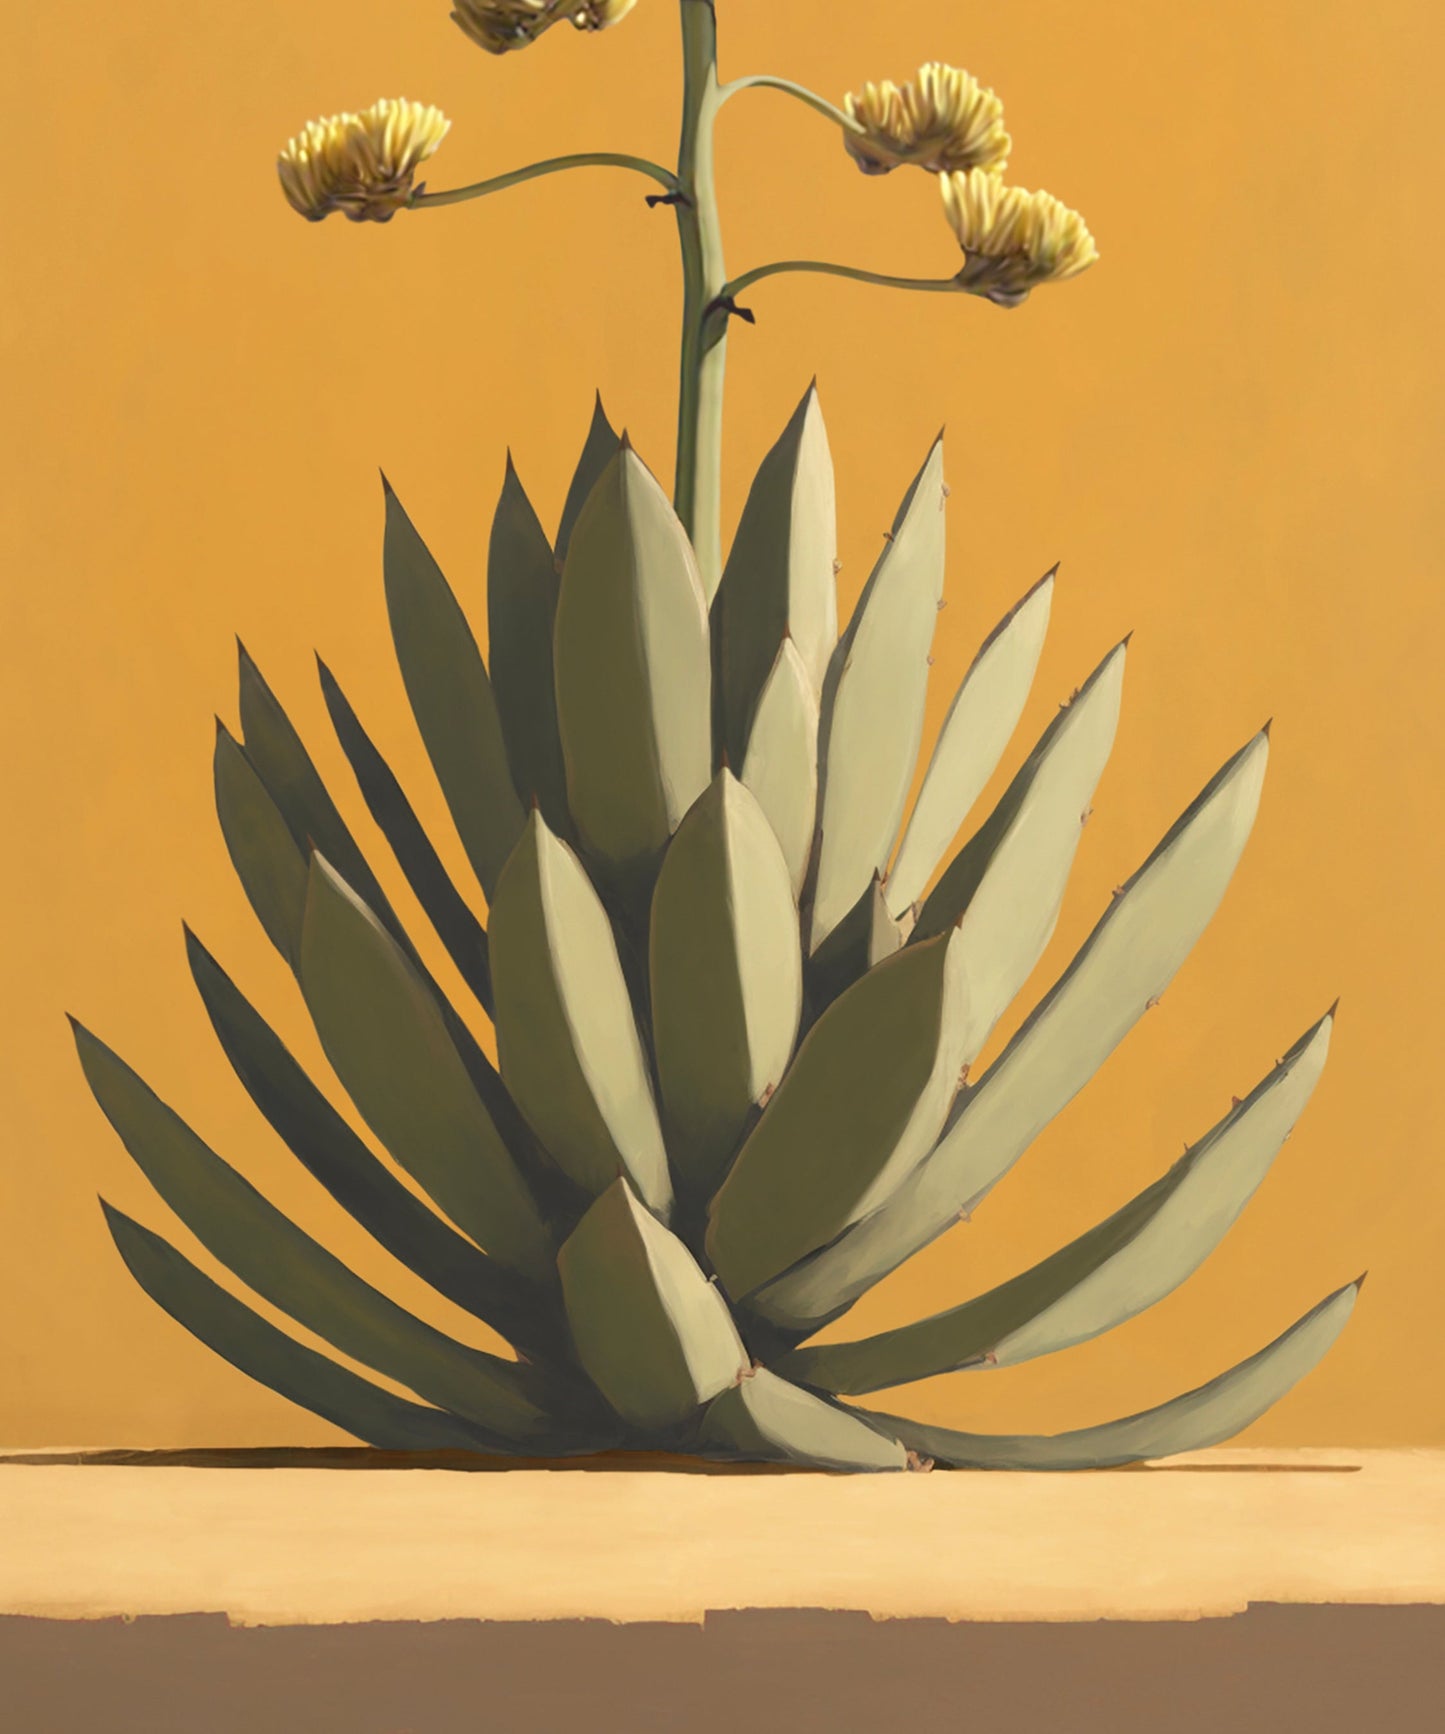 Lone Cacti Series #2 of 3 - Agave